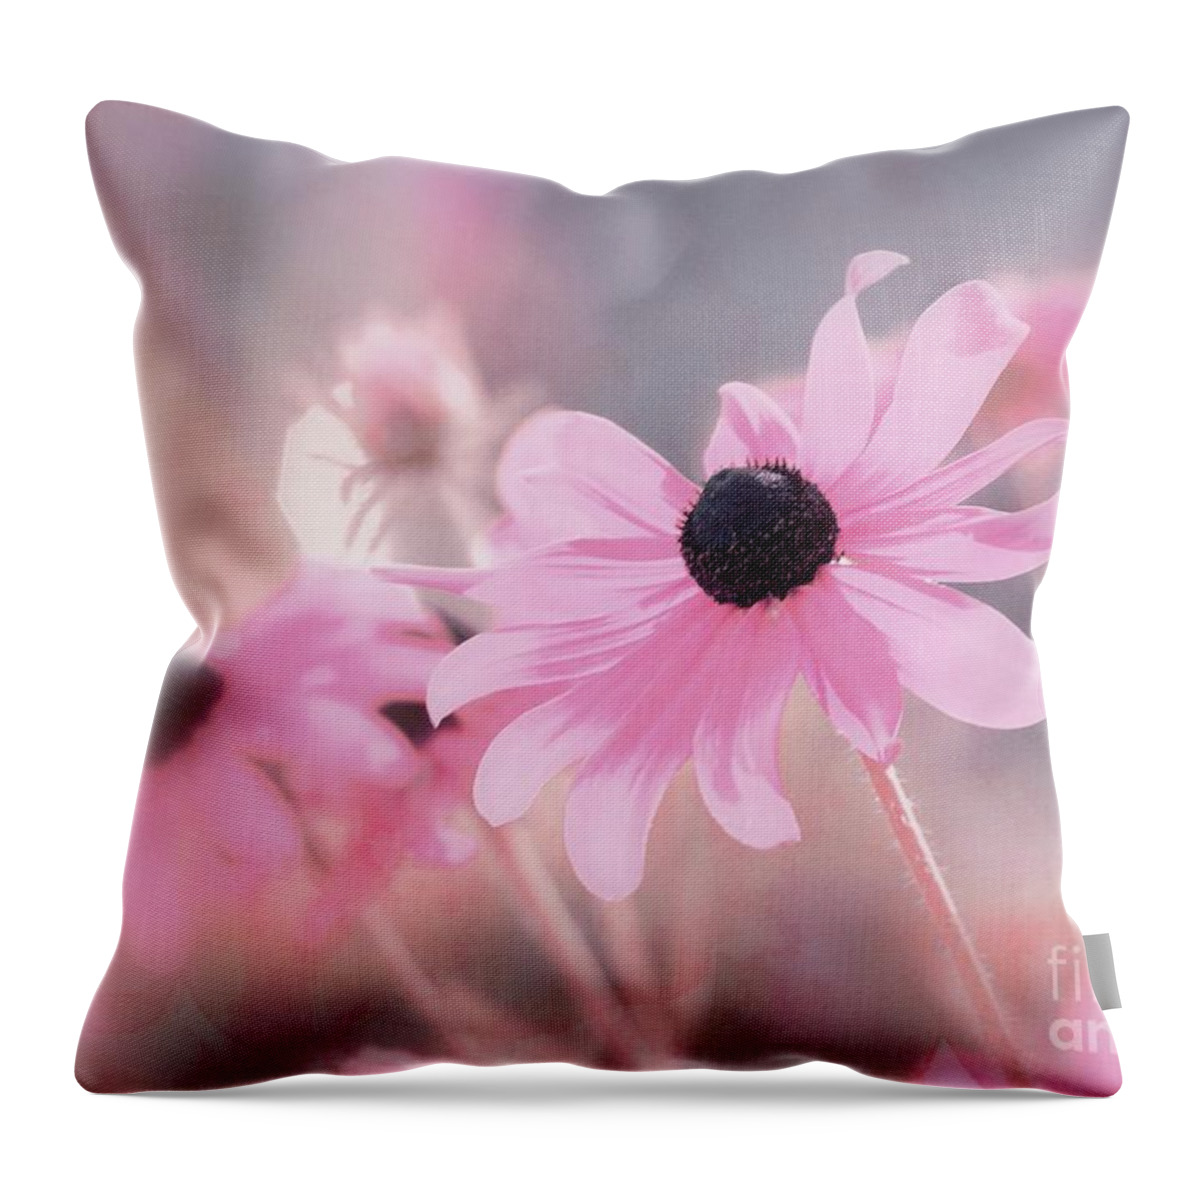 Flowers Throw Pillow featuring the photograph Luminous - 29bt01 by Variance Collections